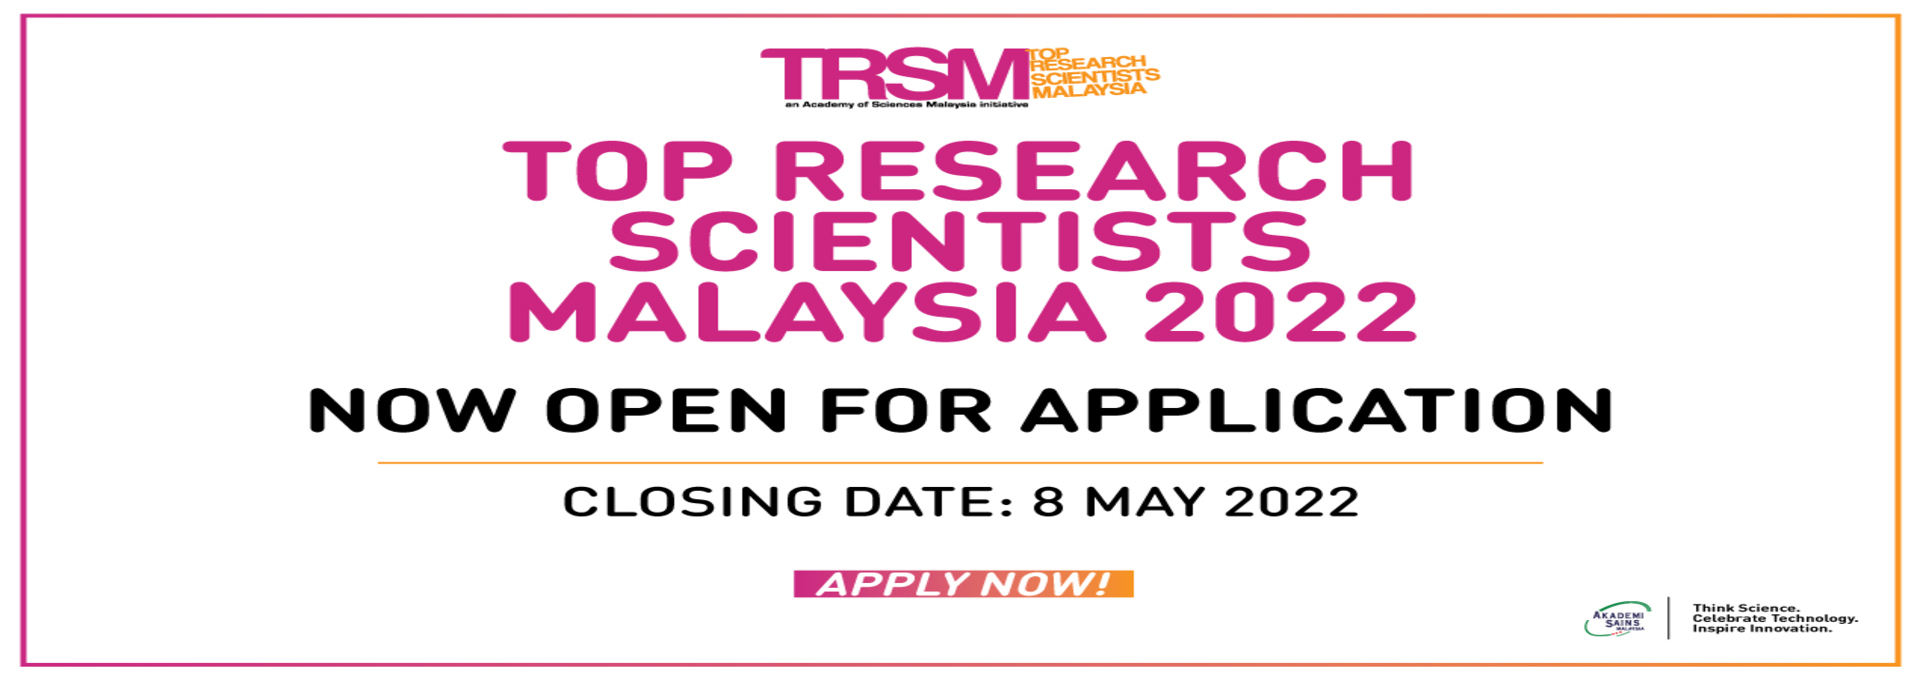 Call for Application for Top Research Scientists Malaysia 2022